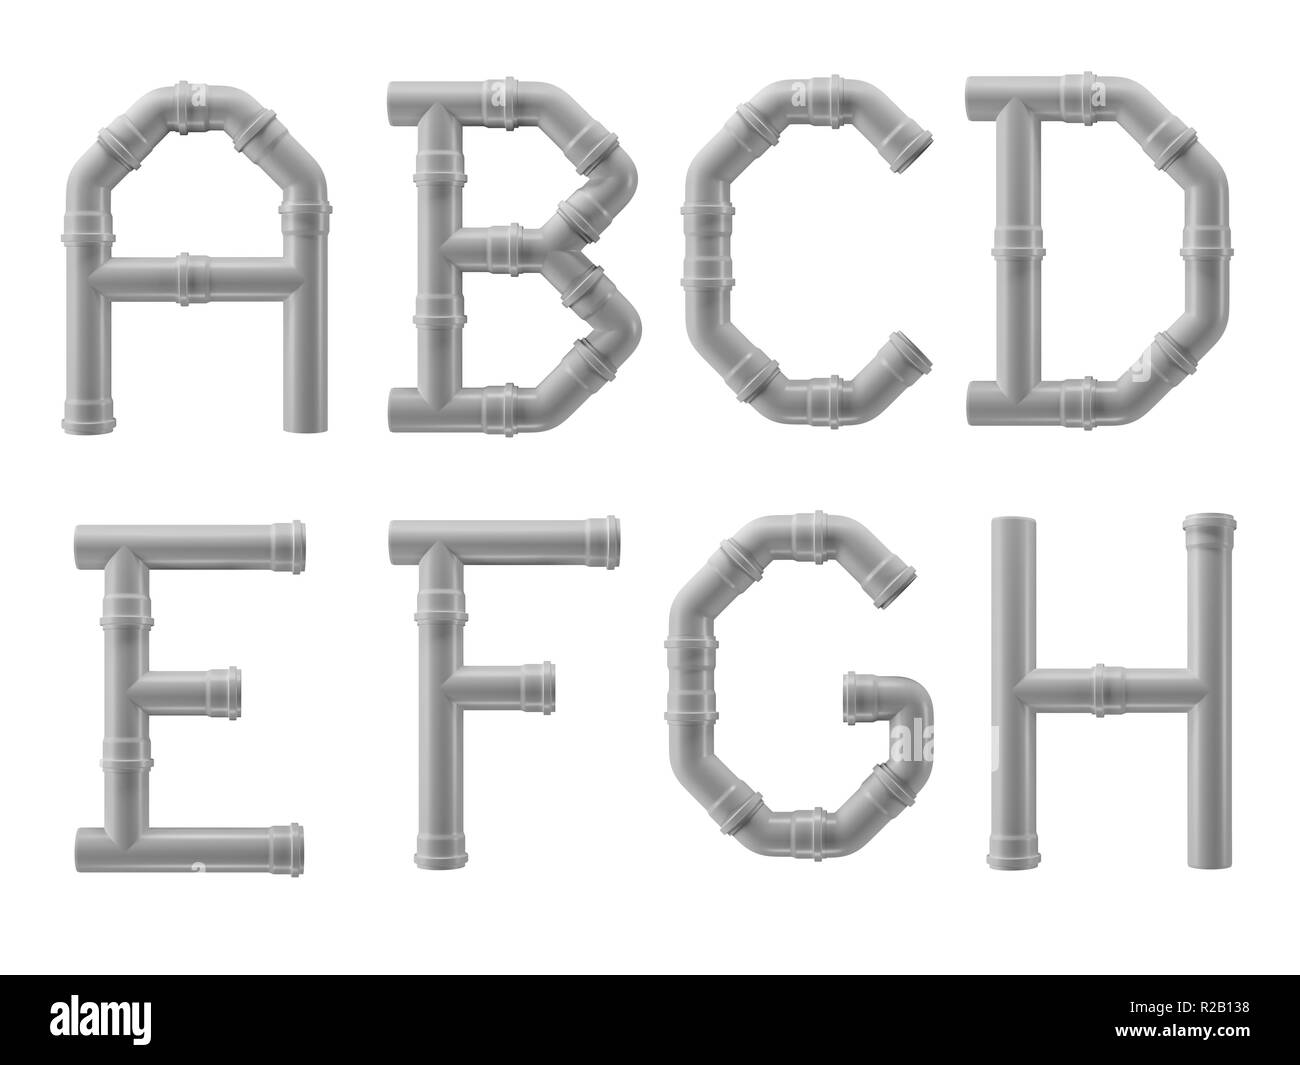 PVC alphabet made of PVC piping elements - letters A to H Stock Photo